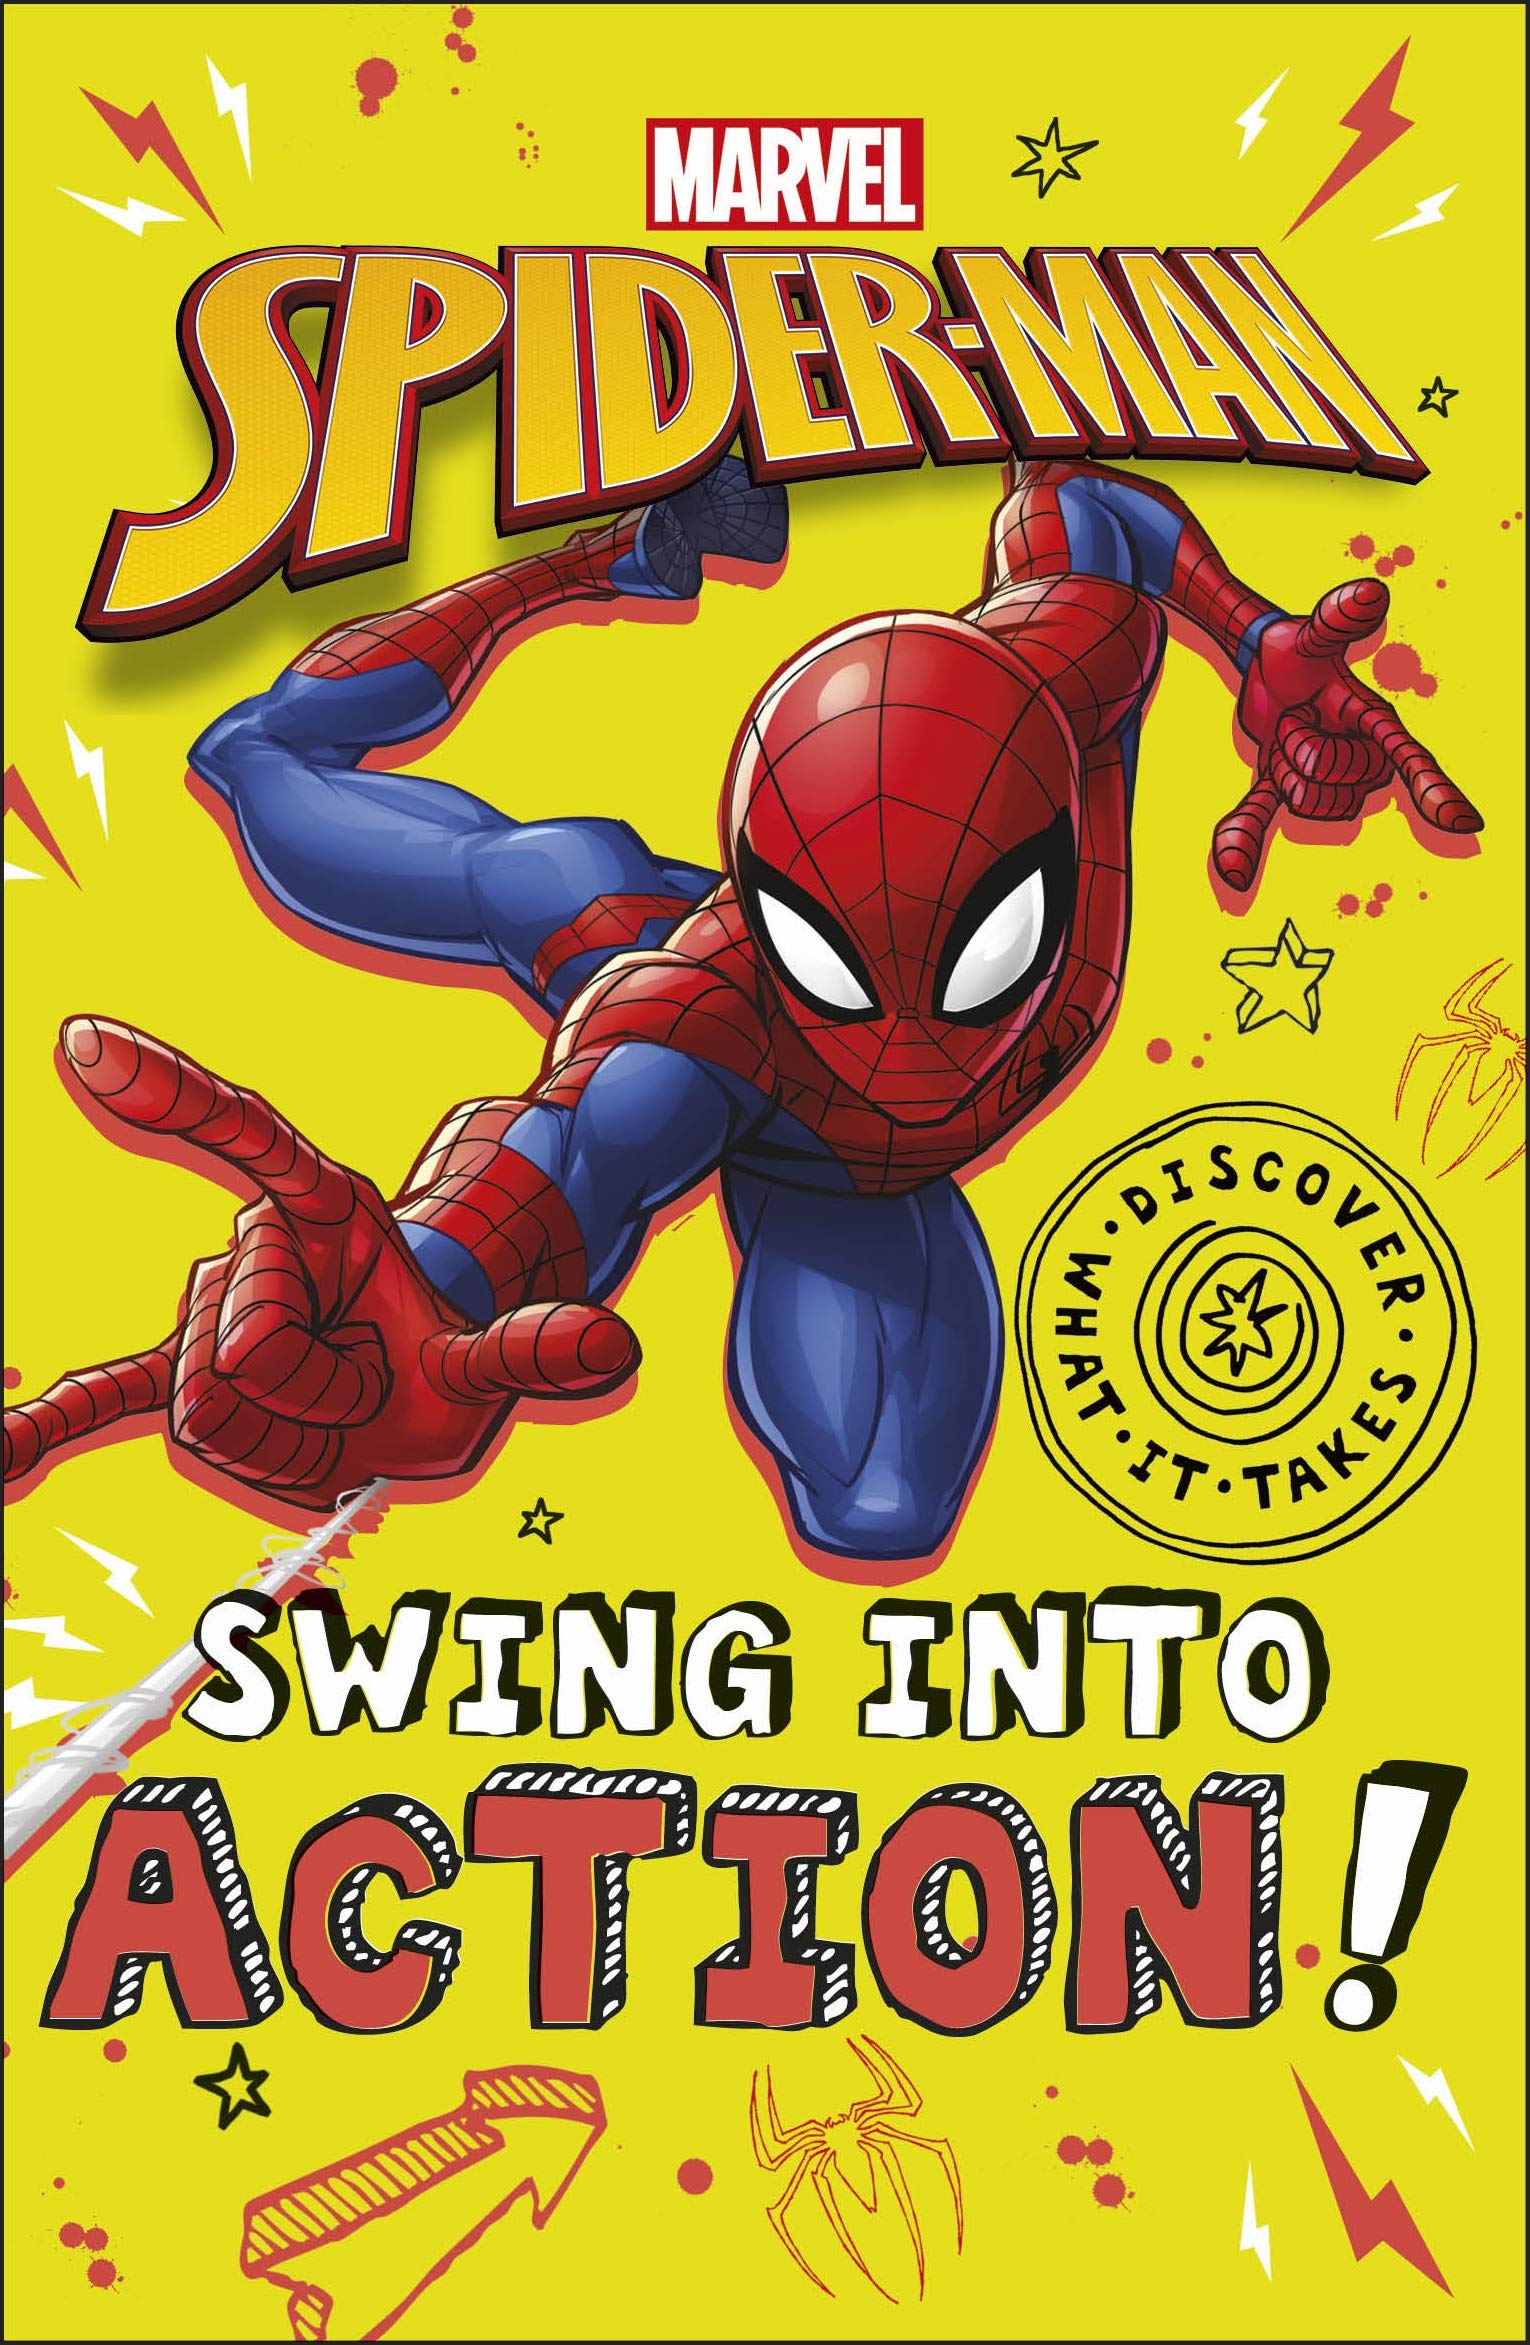 Marvel Spider-Man Swing into Action